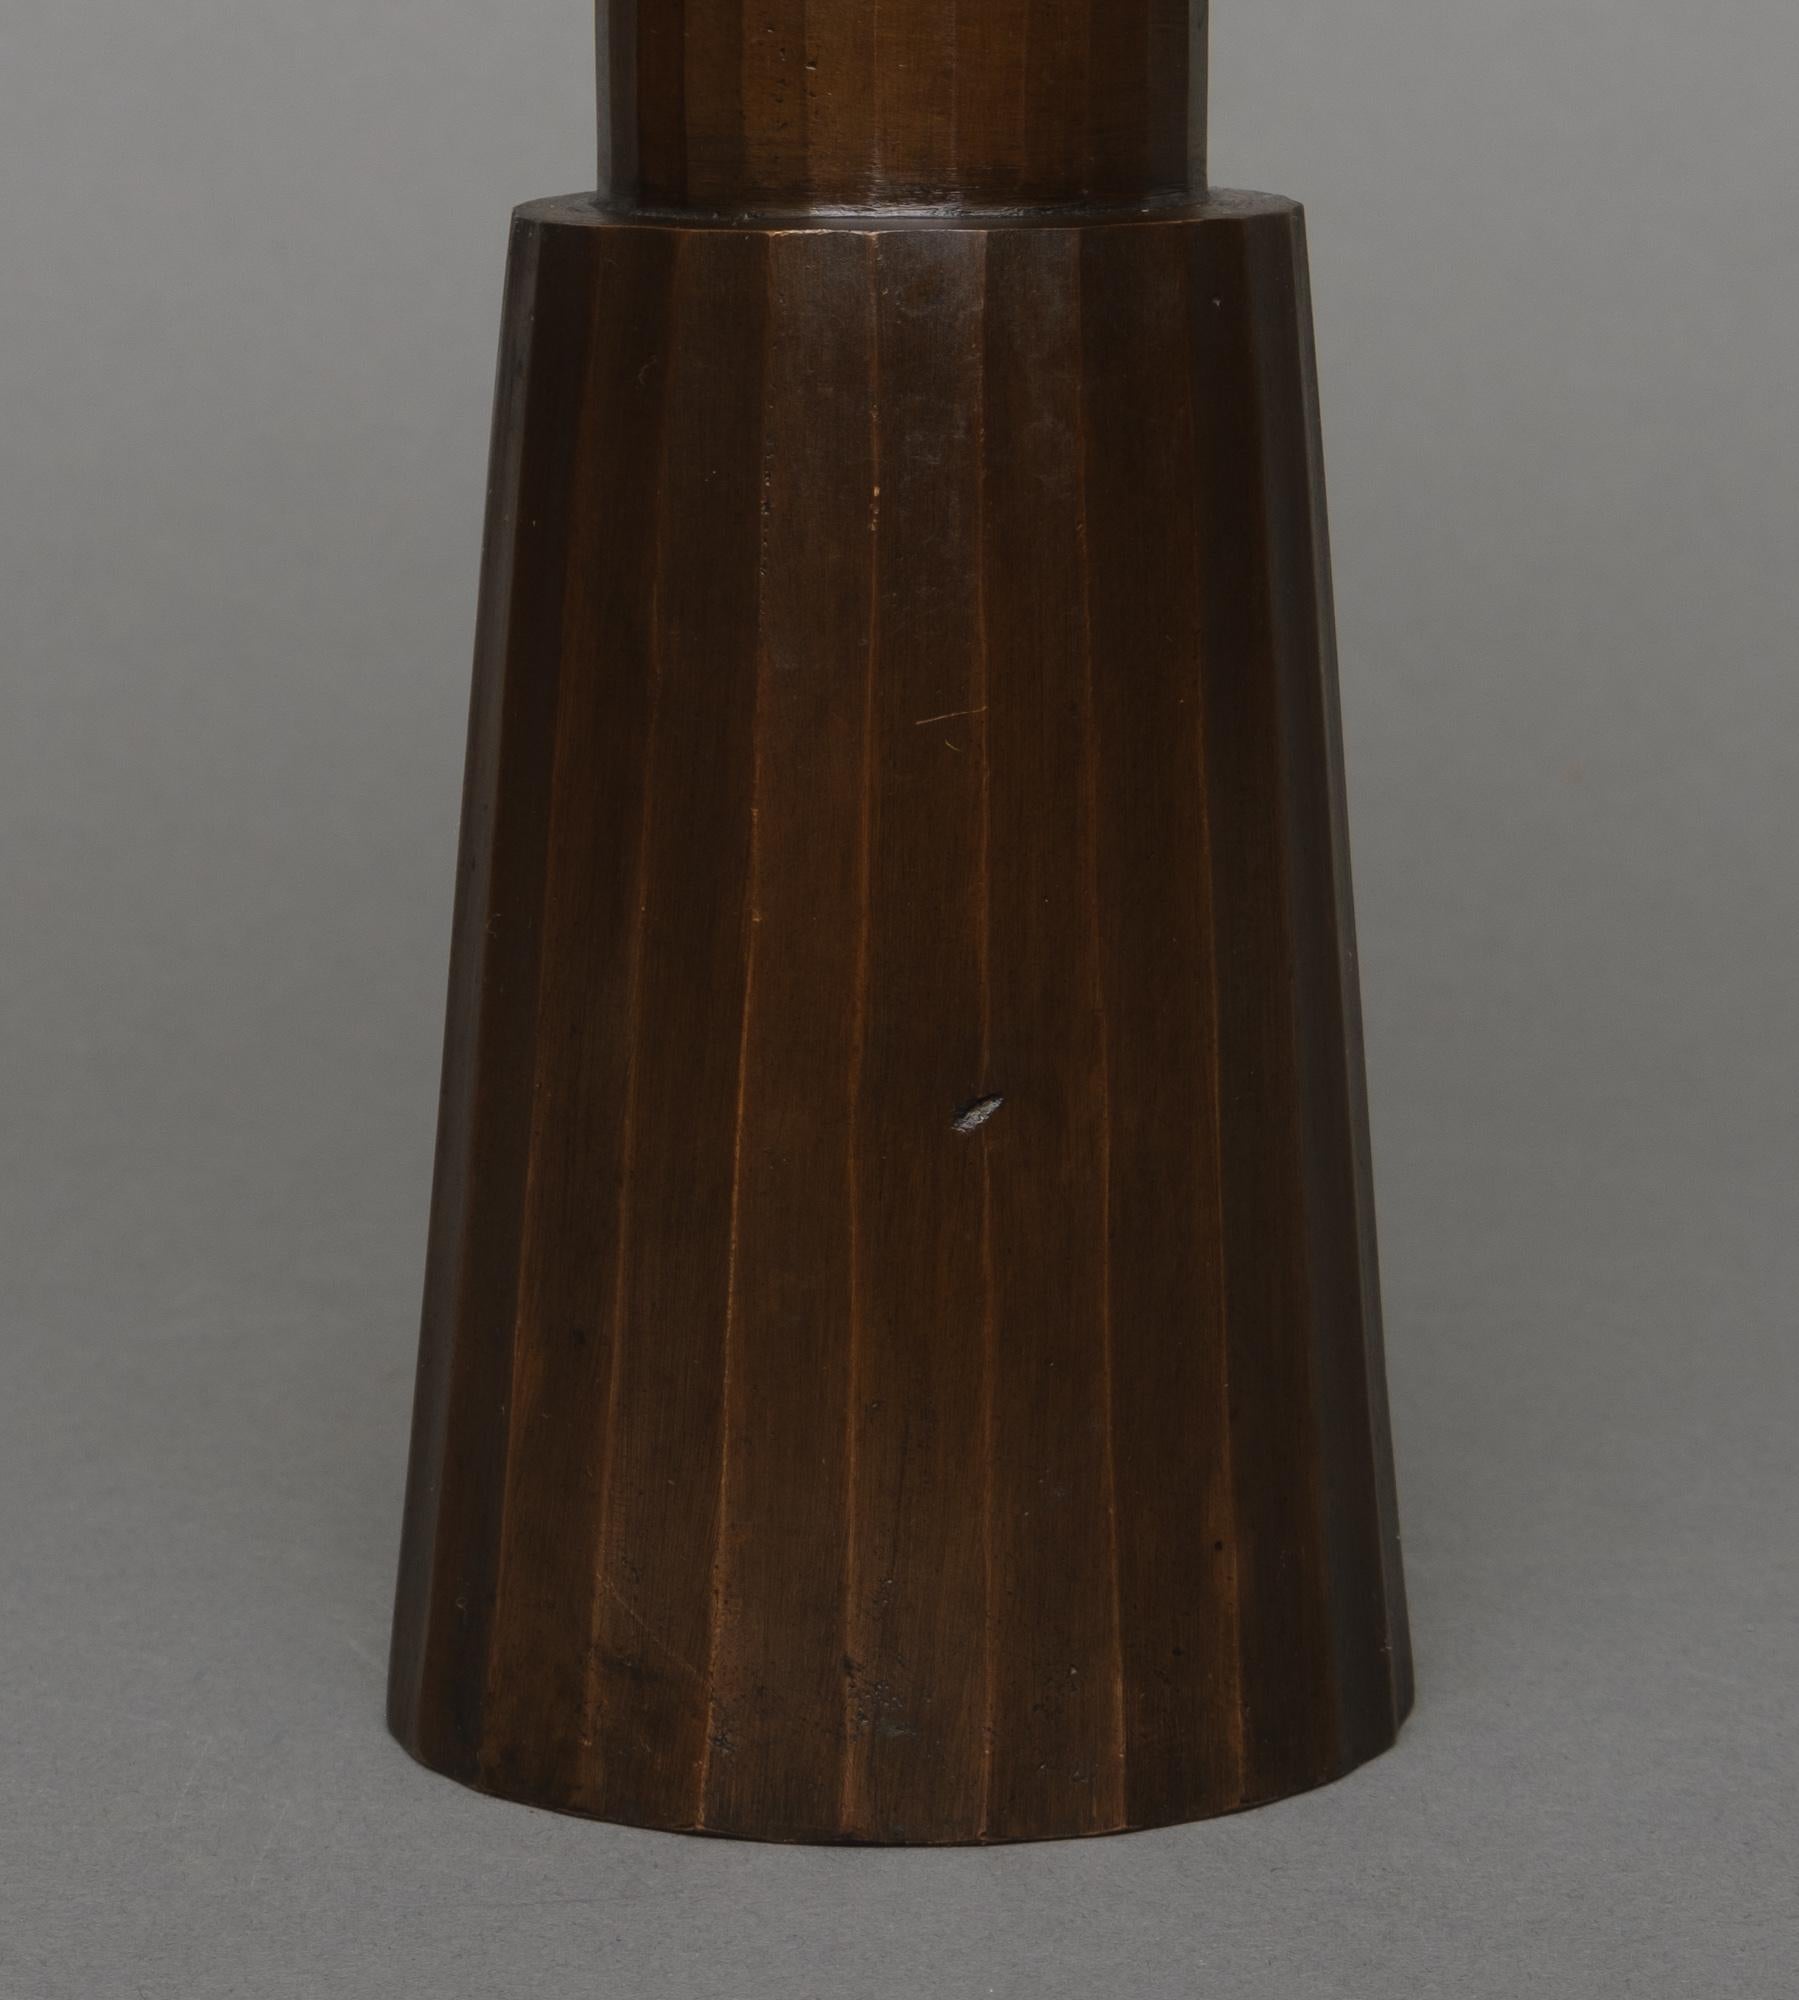 Japanese Patinated Bronze Vase in an Hourglass-Shape with Vertical Ribs 1